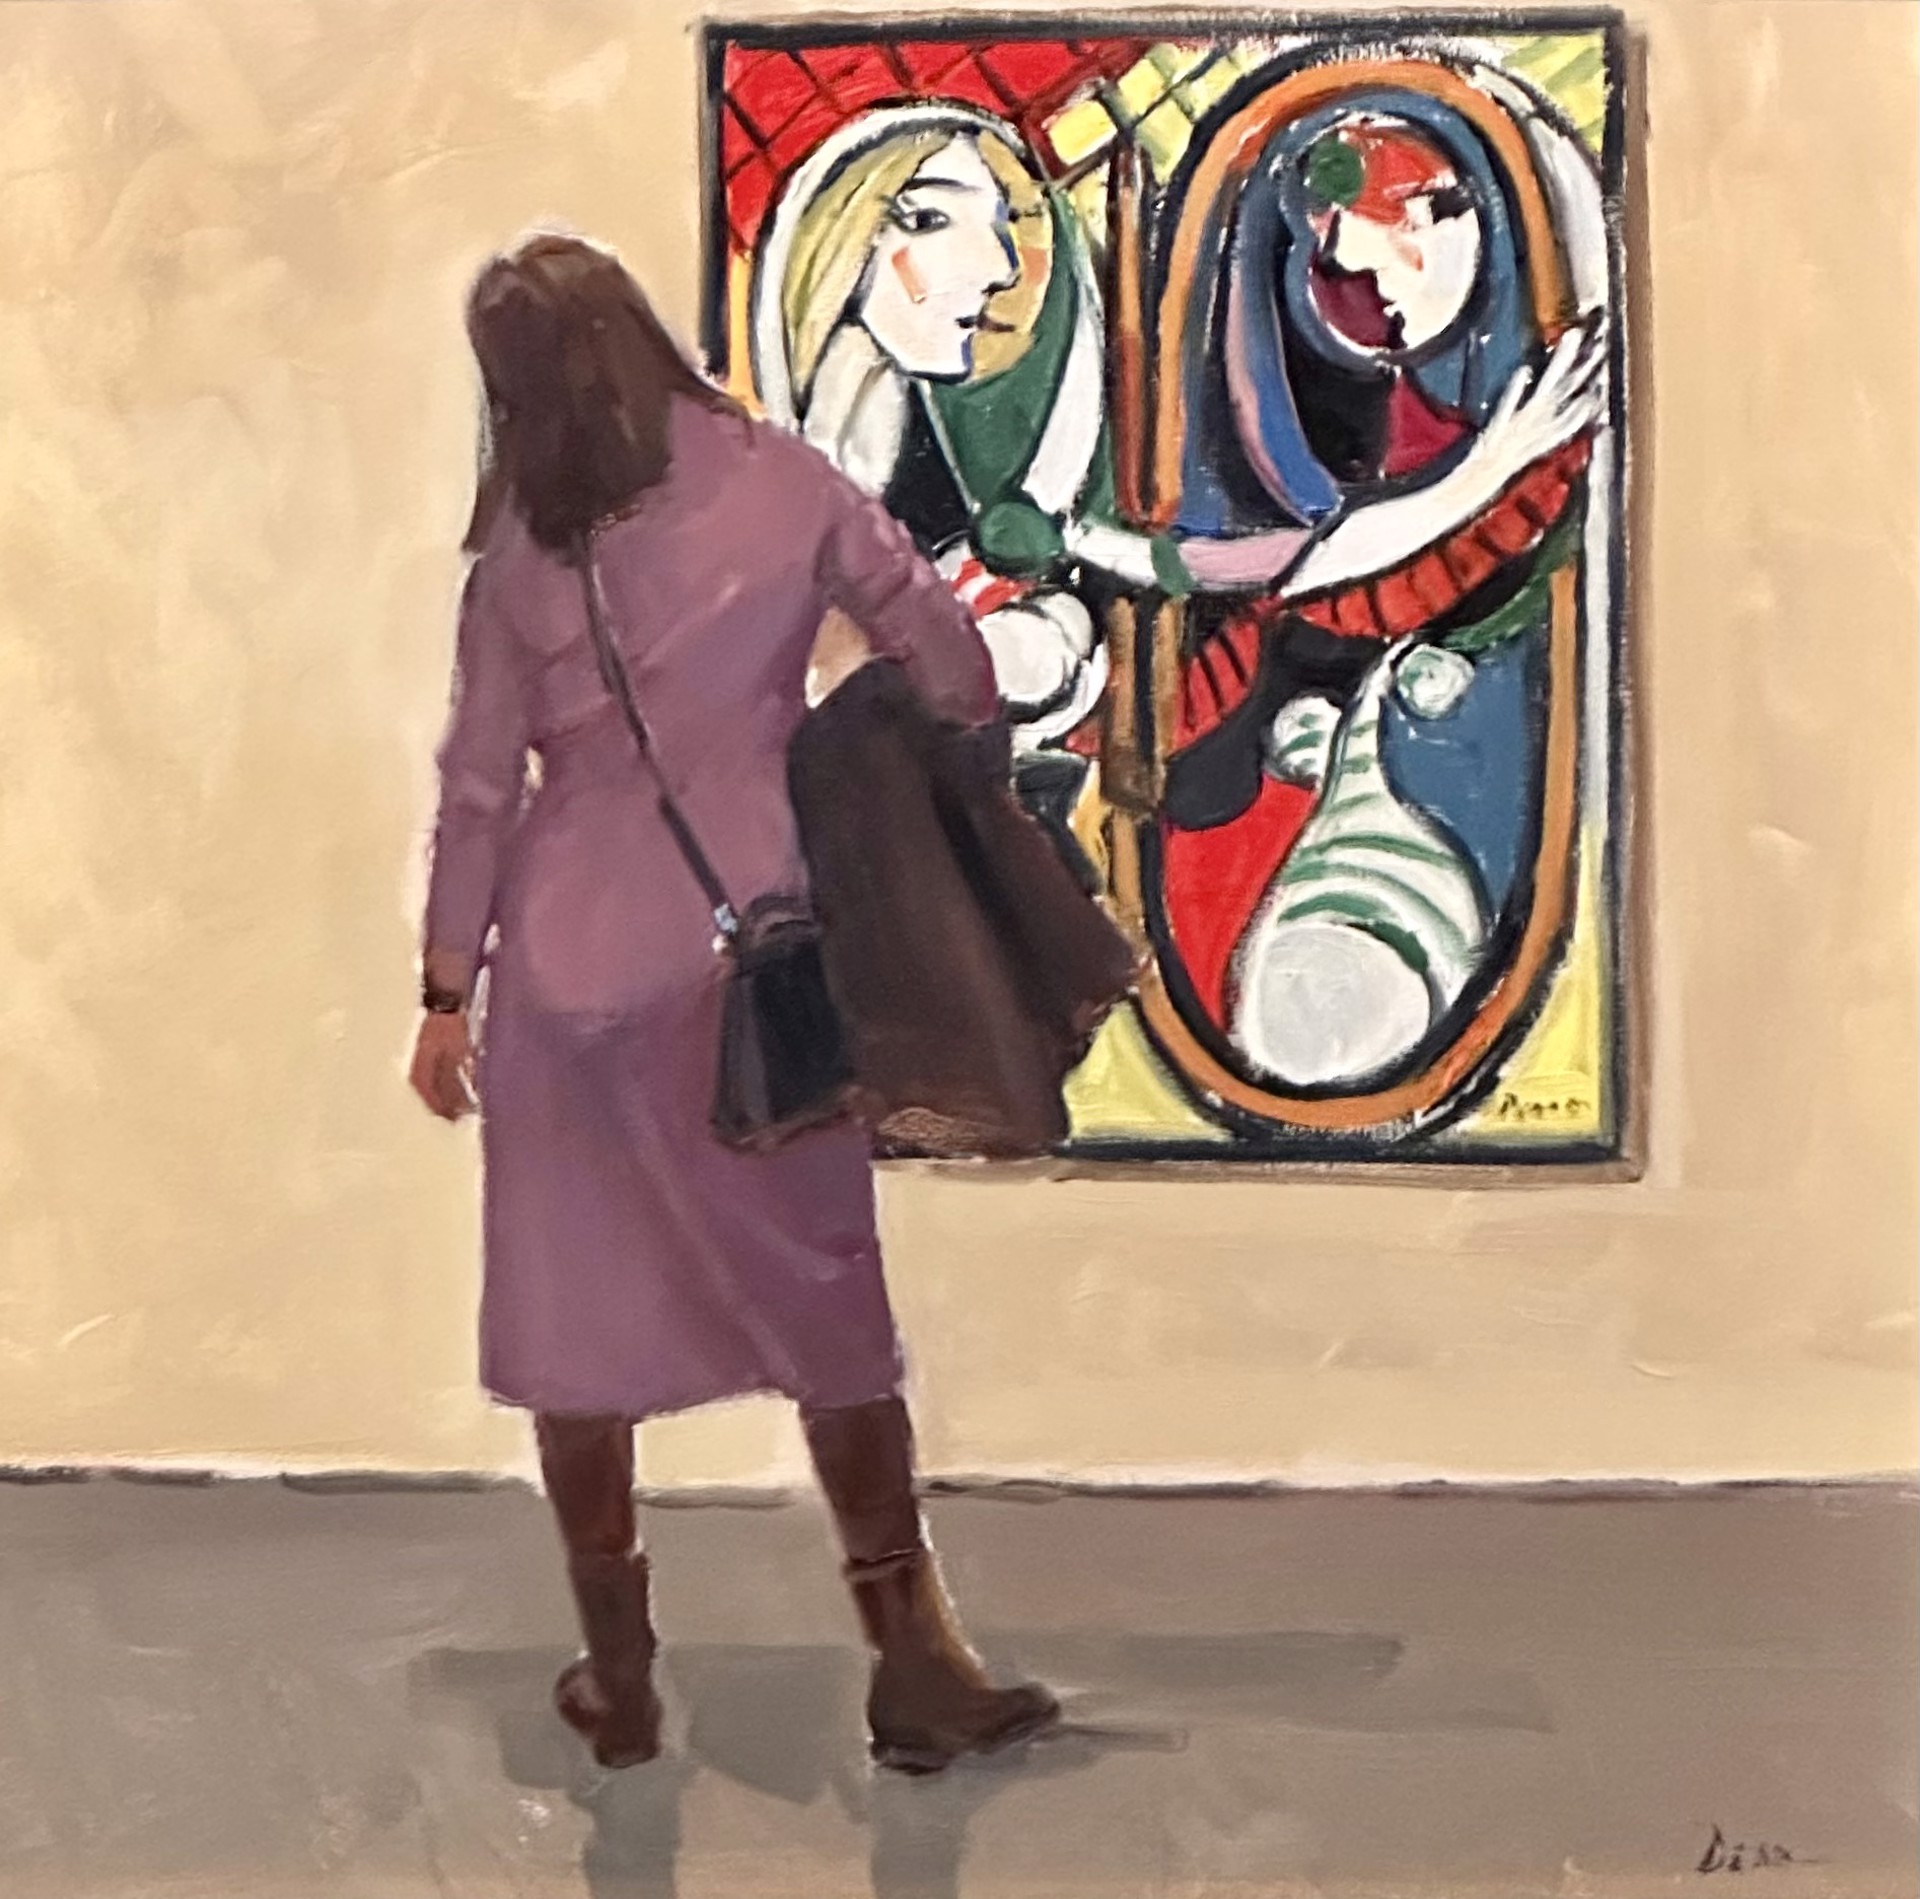 Woman with a Mirror, Picasso by Dee Beard Dean